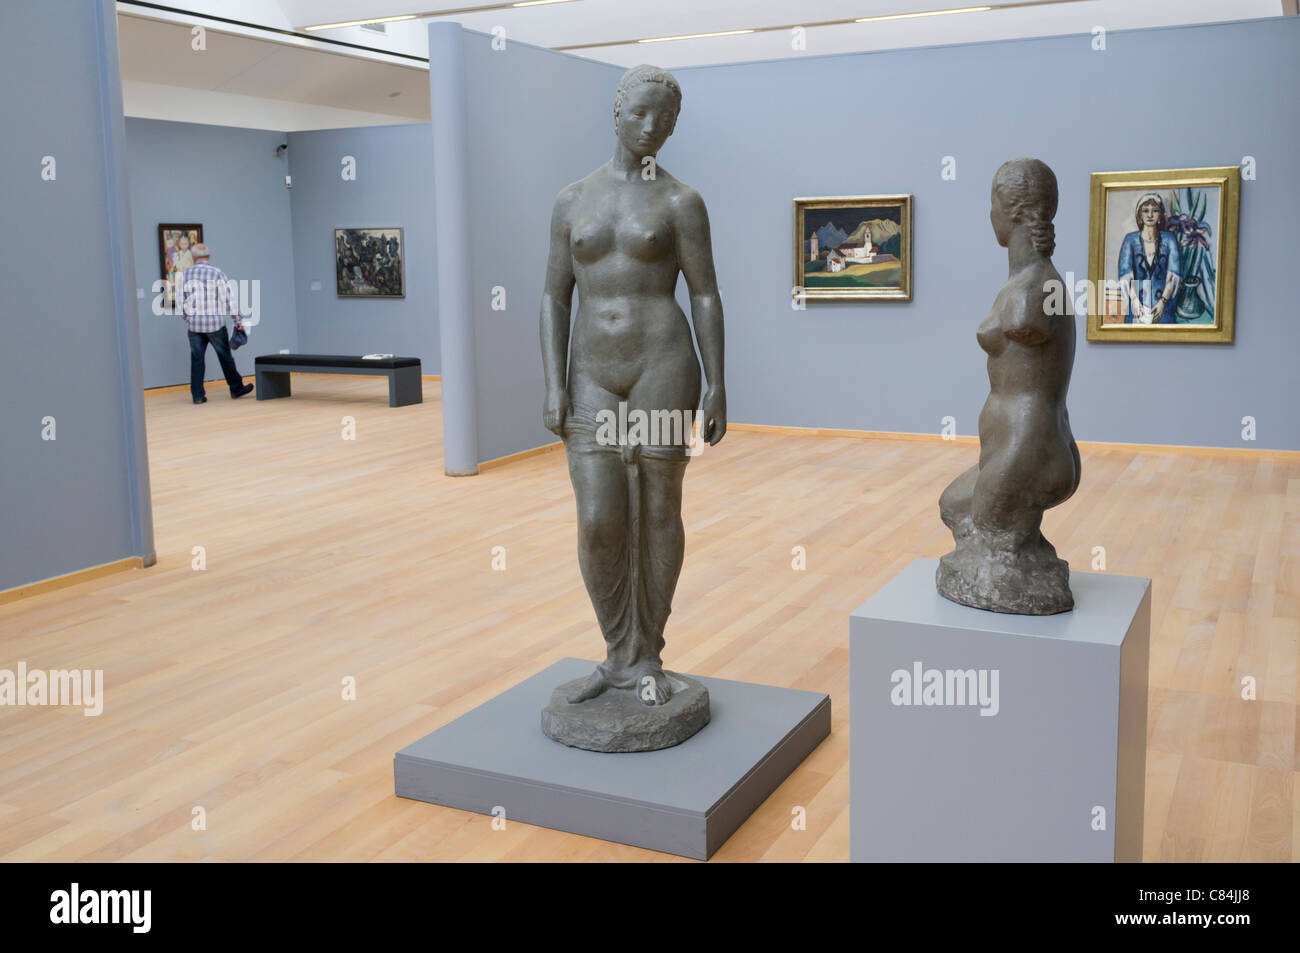 Sculptures by Wilhelm Lehmbruck at the Museum Kunst Palast or Art Palace Museum in Dusseldorf in Germany Stock Photo